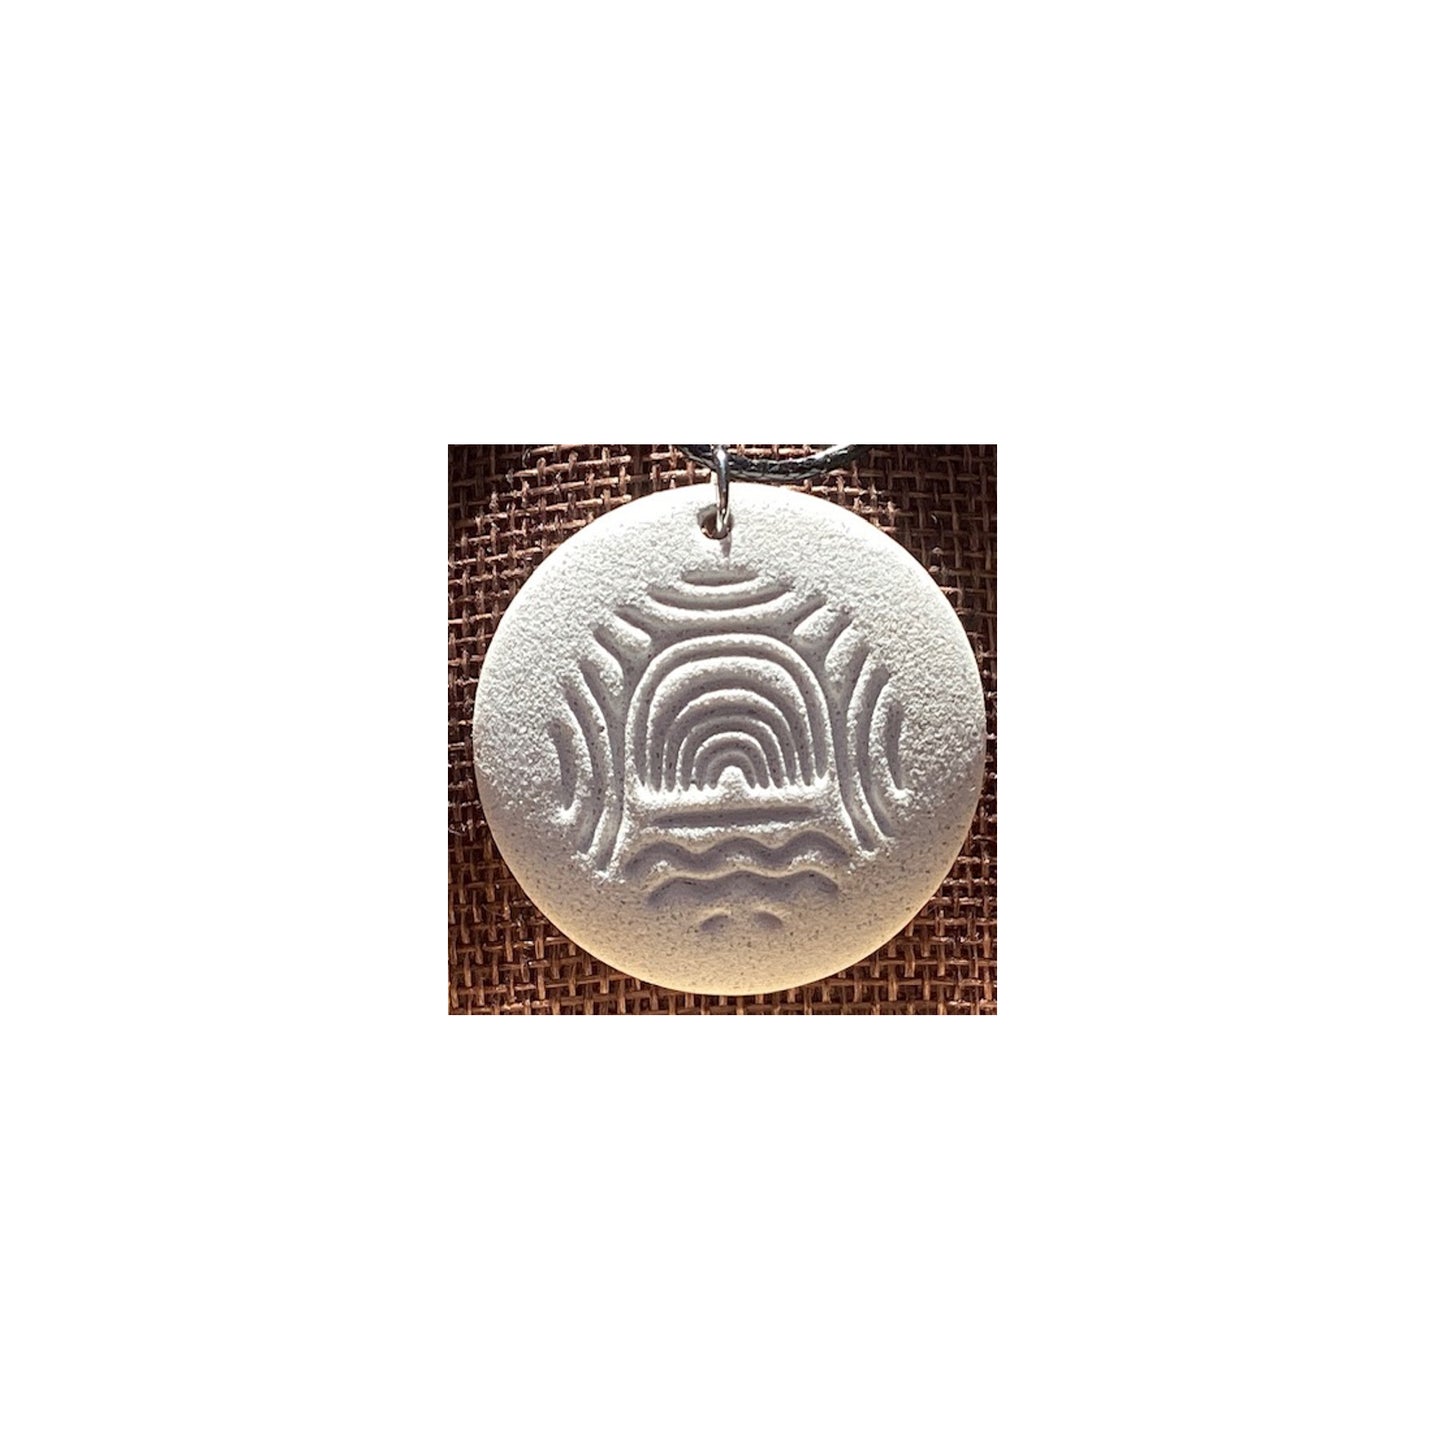 Megalithic Art Pendant with Portal Design.